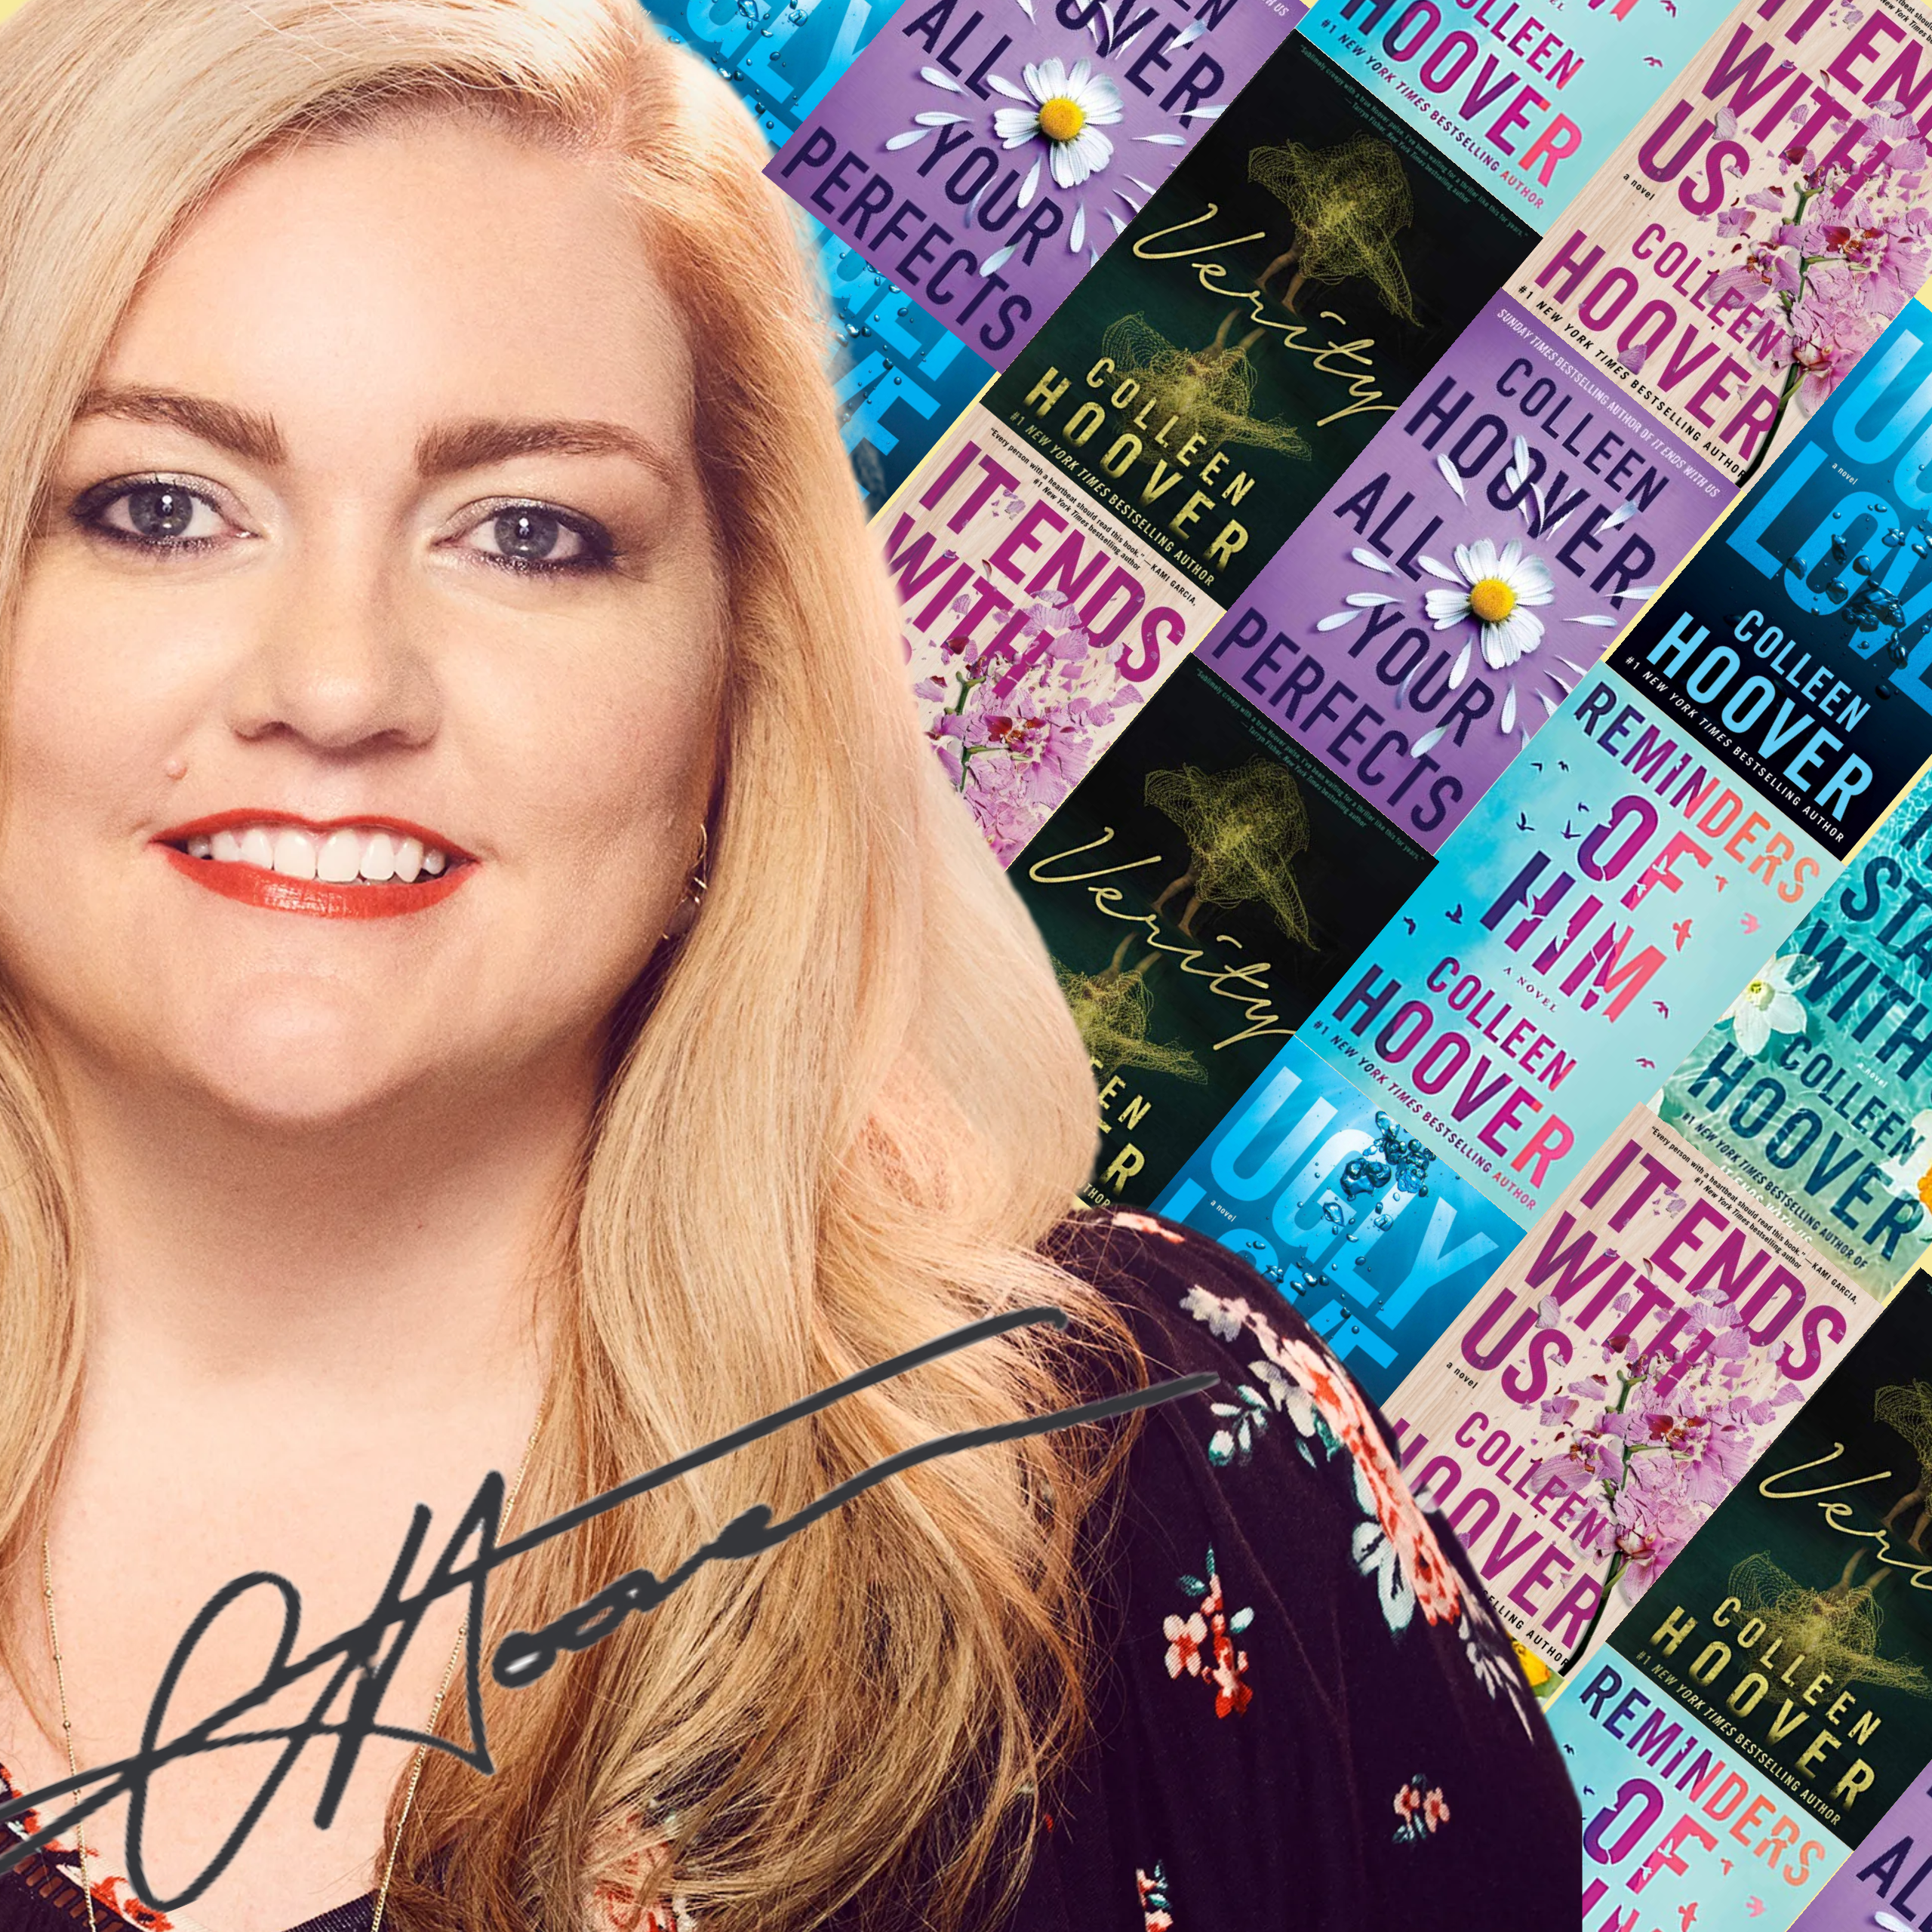 Colleen Hoover  Biography, Books, It Ends with Us, & Facts